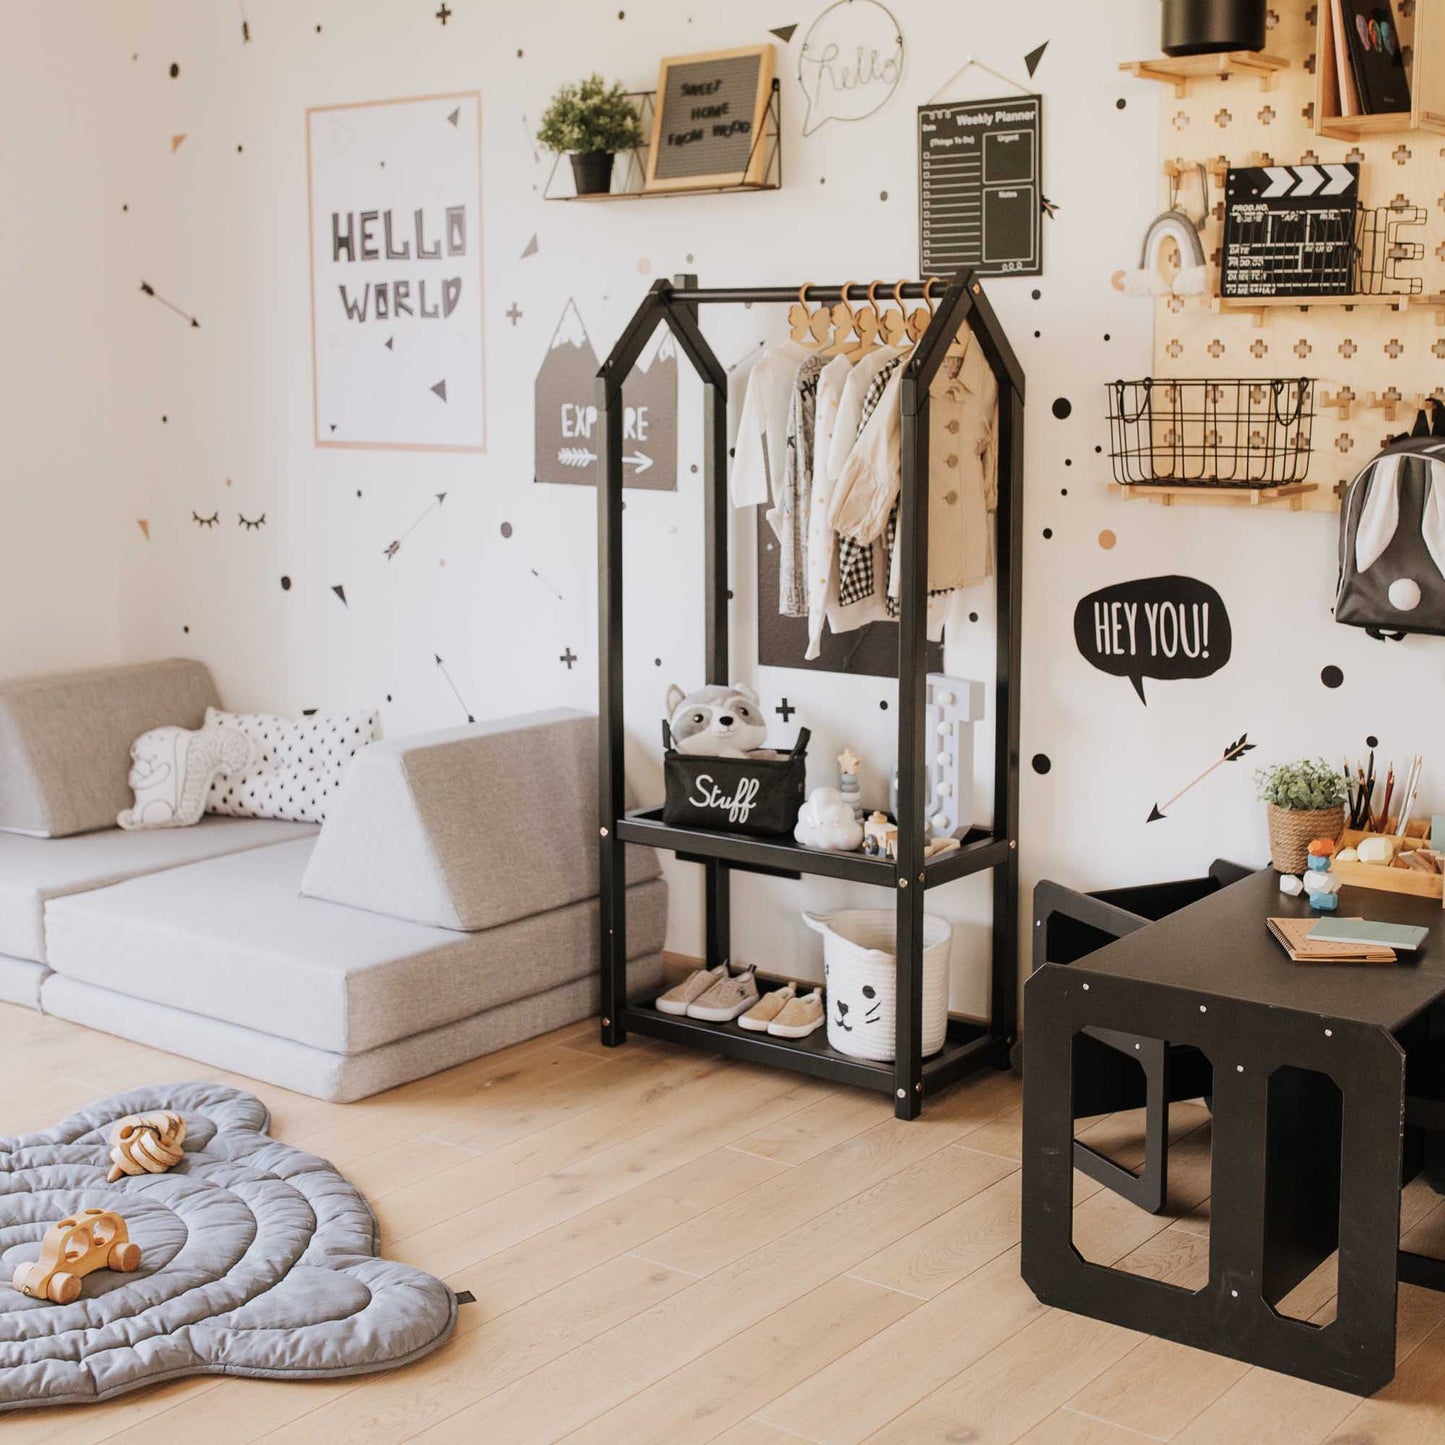 A black and white kids room with polka dots on the wall, featuring a Montessori wardrobe from Sweet Home From Wood for displaying toddler clothing.